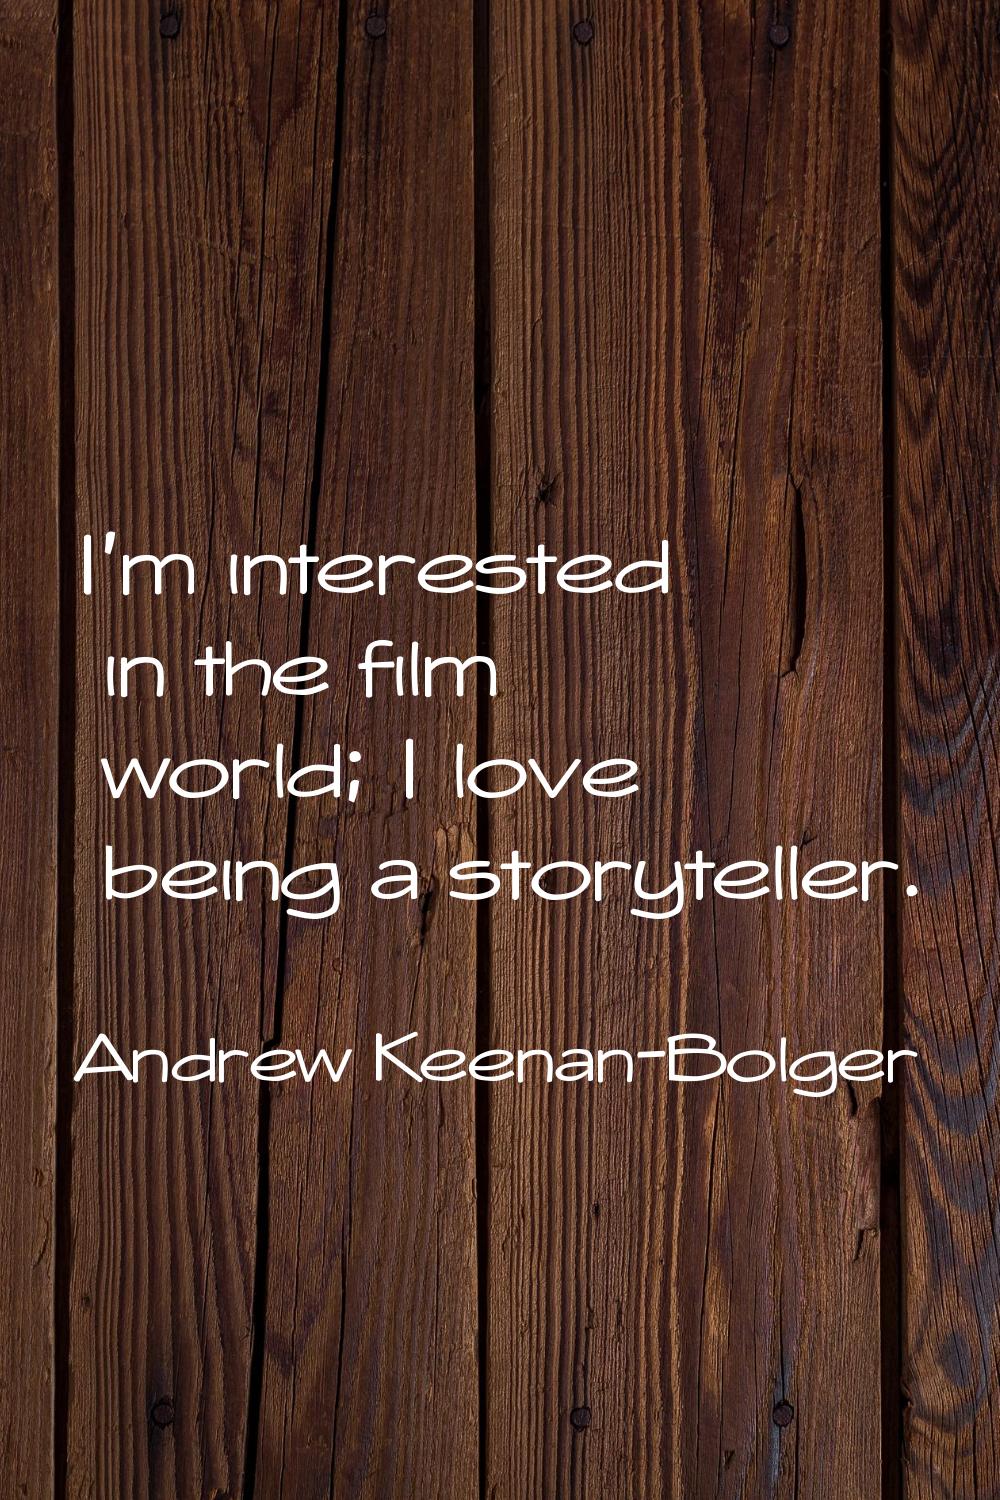 I'm interested in the film world; I love being a storyteller.